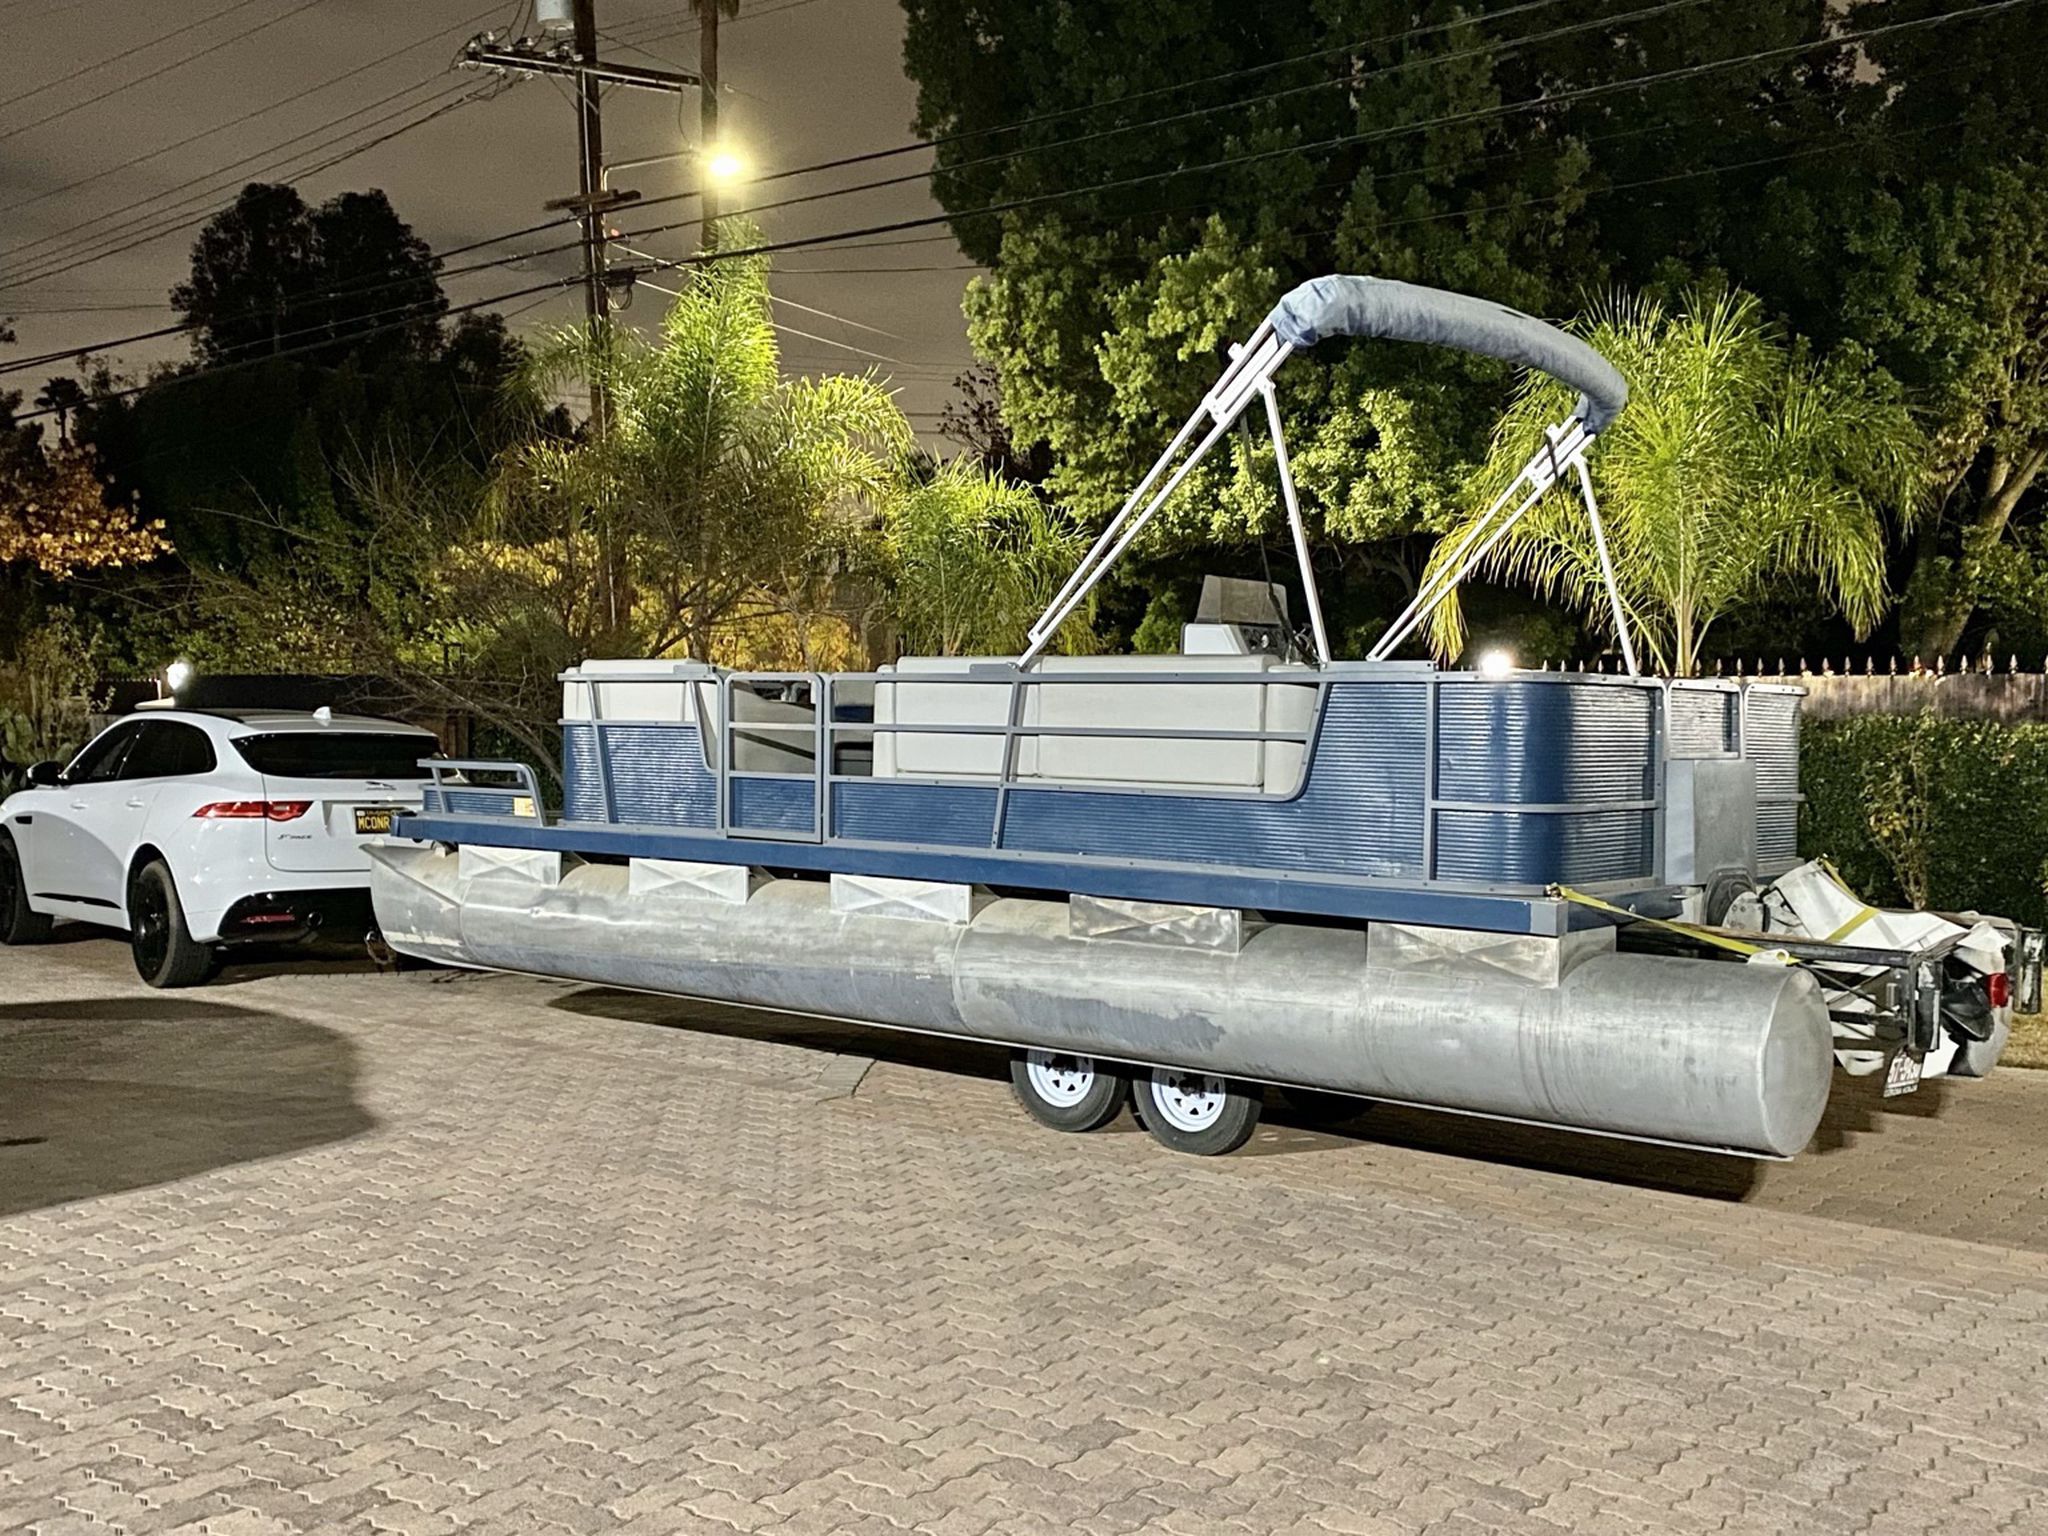 1983 20’ Harris Pontoon Boat With Inboard/outboard Engine